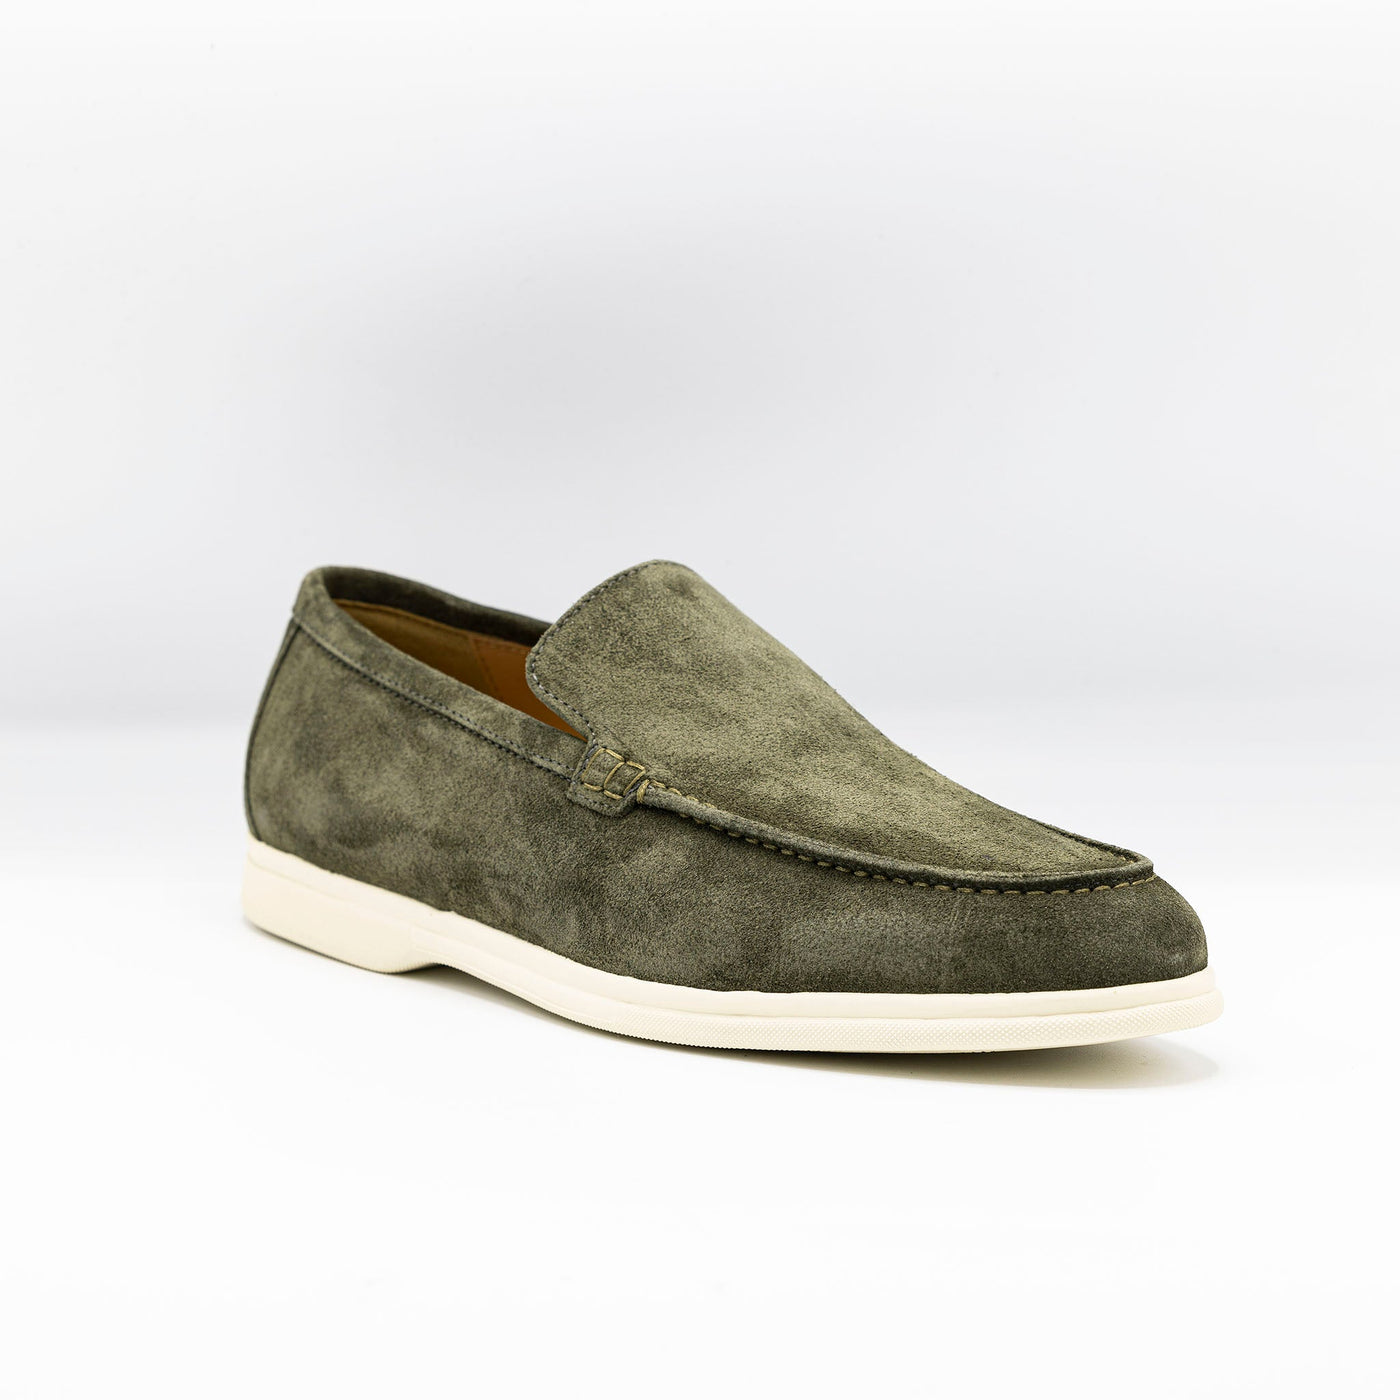 City loafer, Summer walk in khaki suede set on a white rubber sole. 